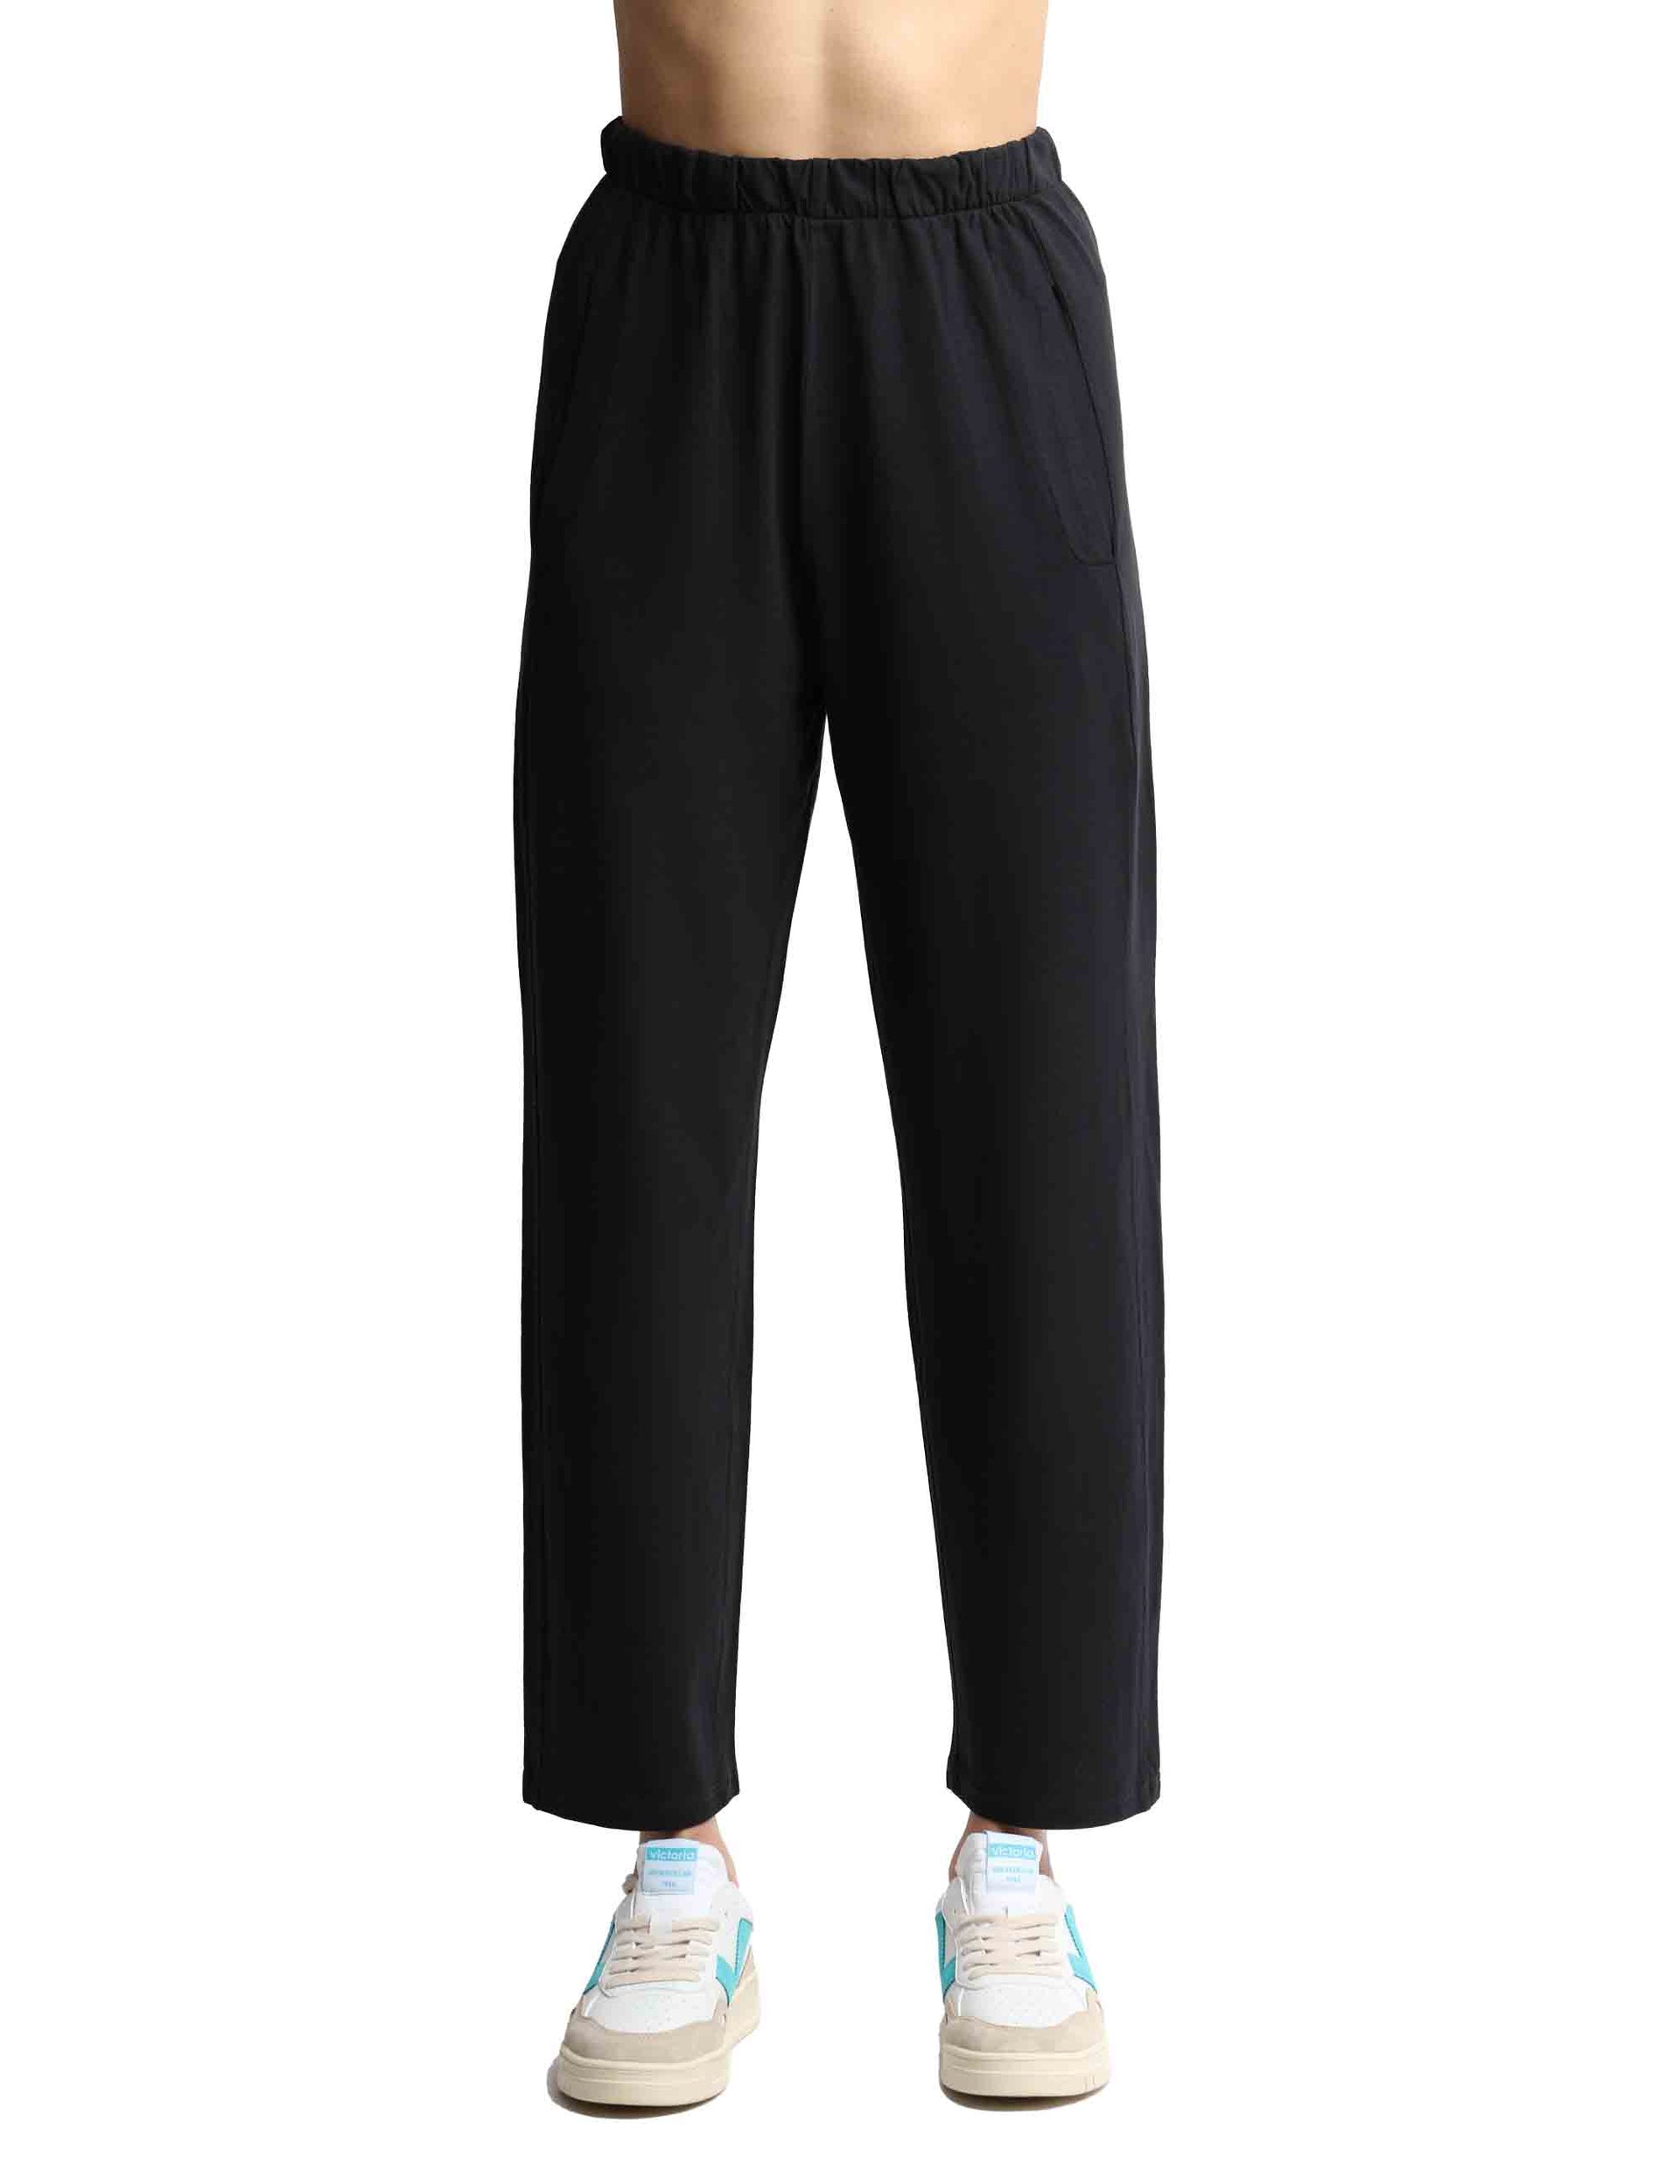 Women's real cotton trousers with elastic waist and French pockets